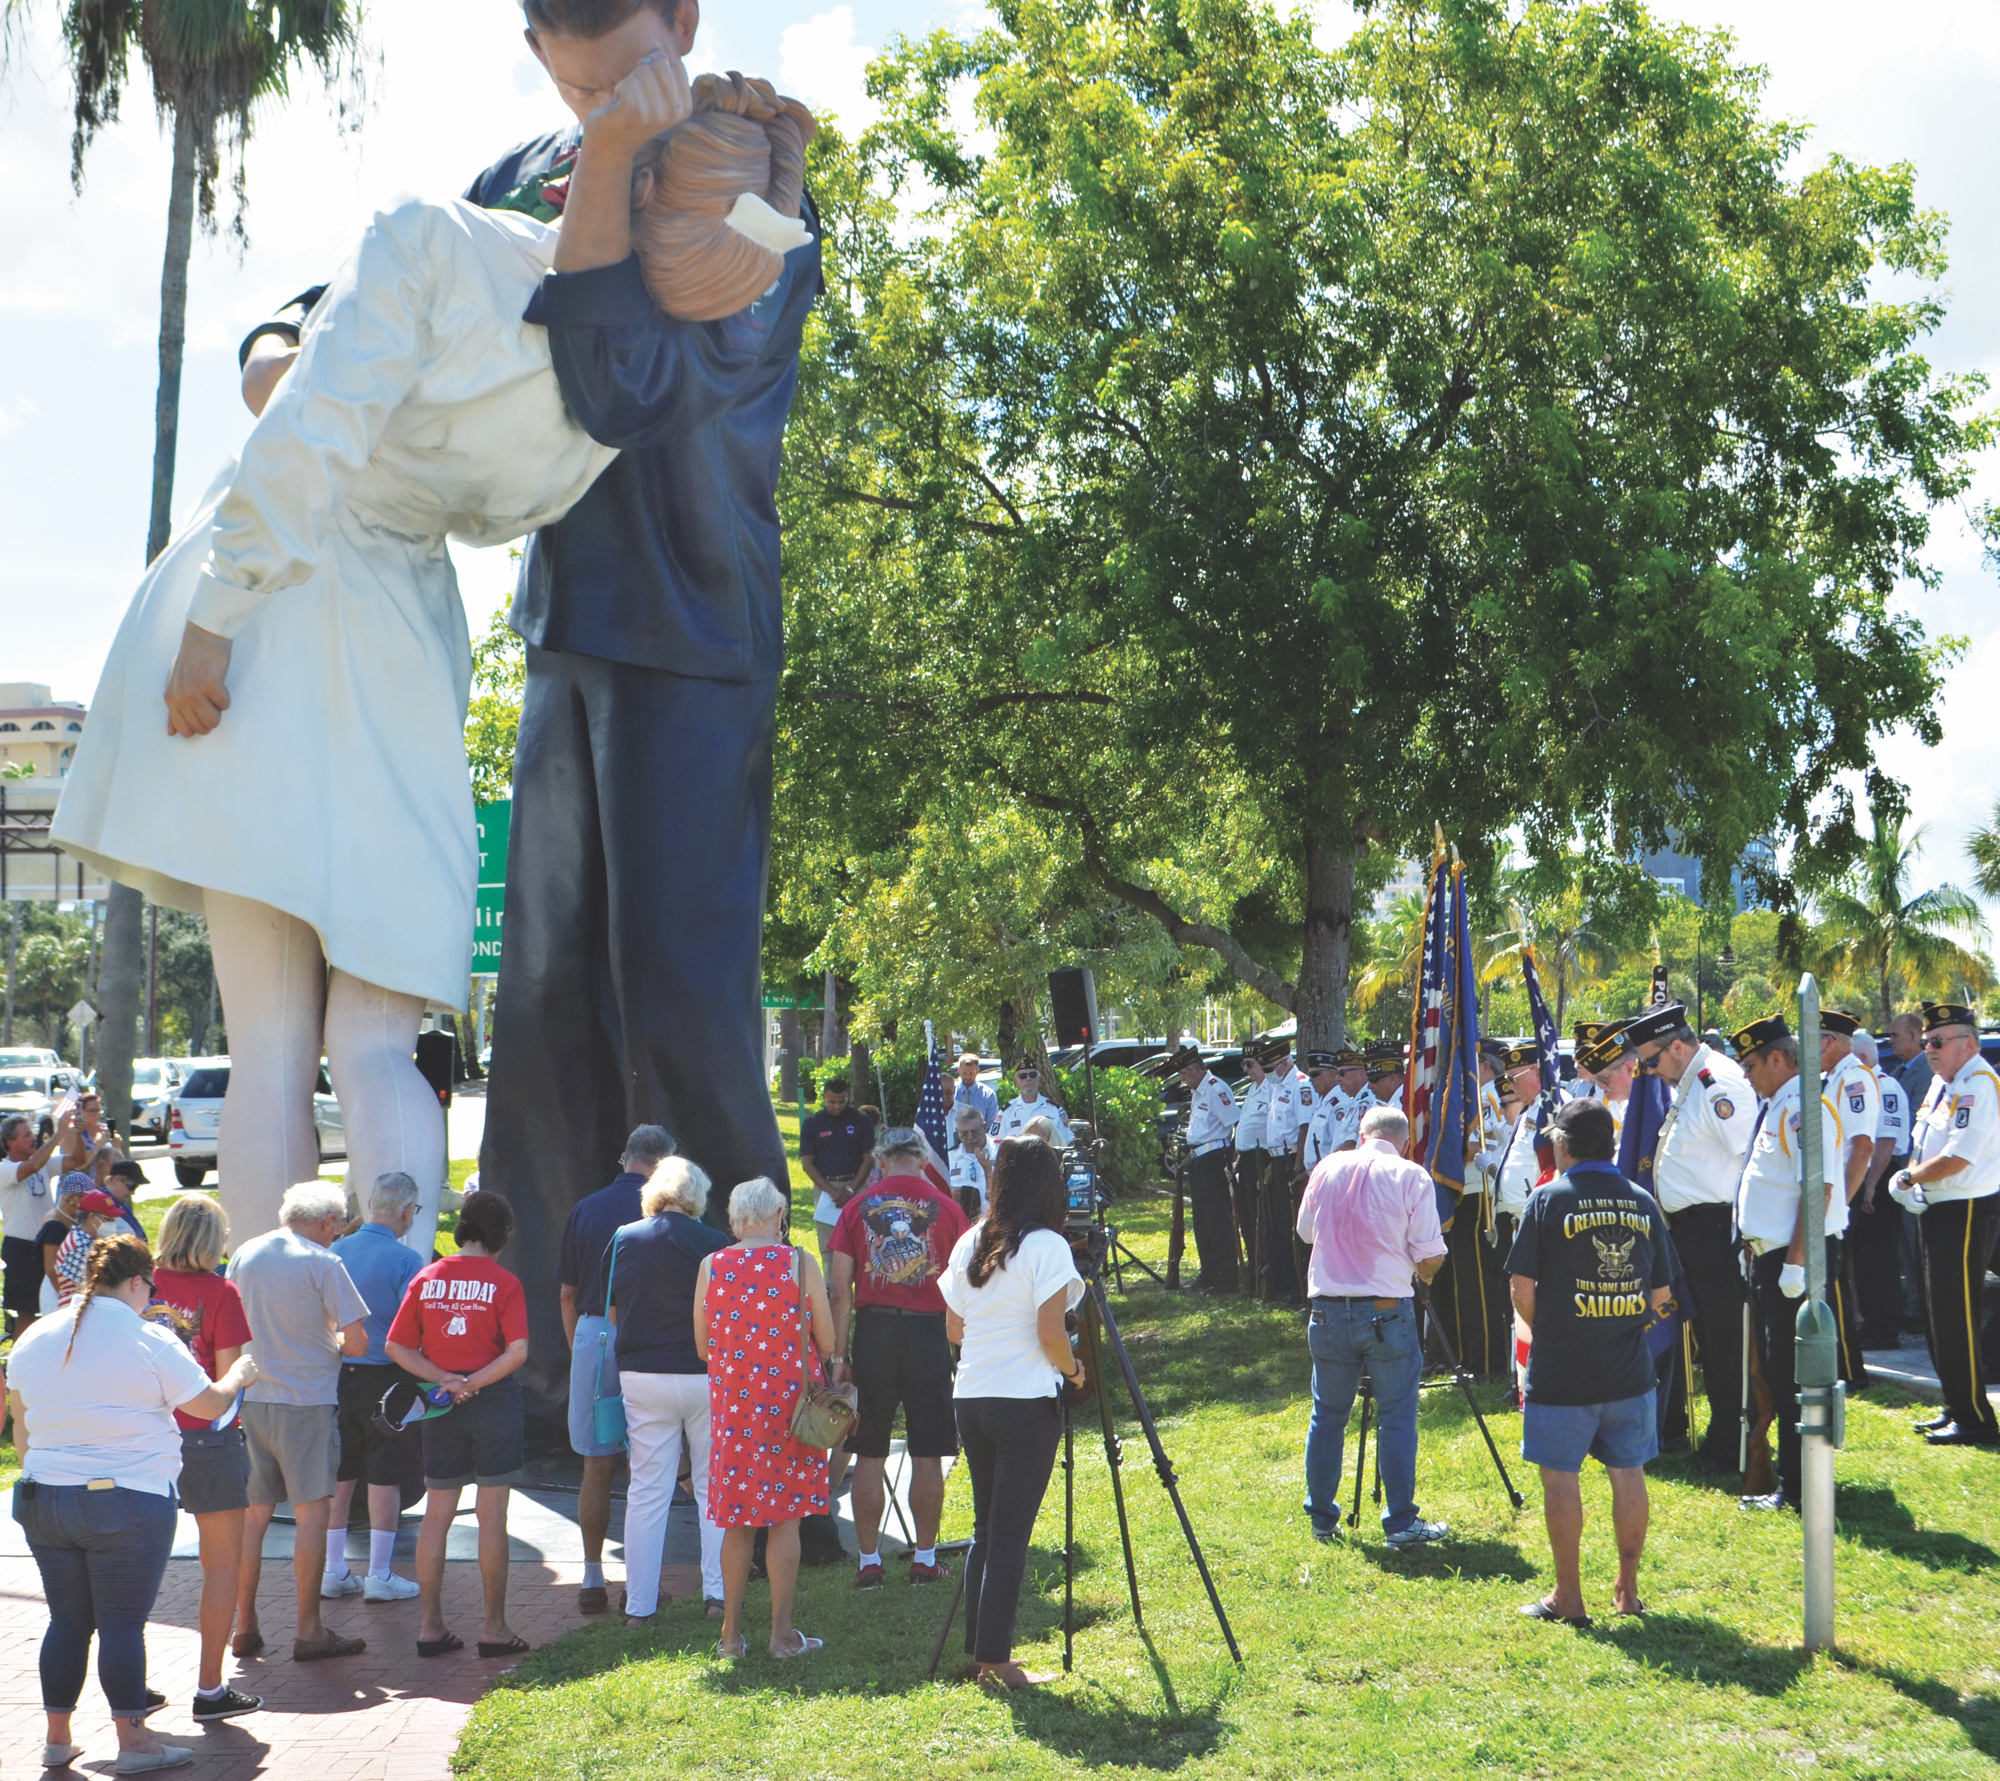 Aug. 20: Supporters of the iconic Unconditional Surrender landmark rally in support of the statue.